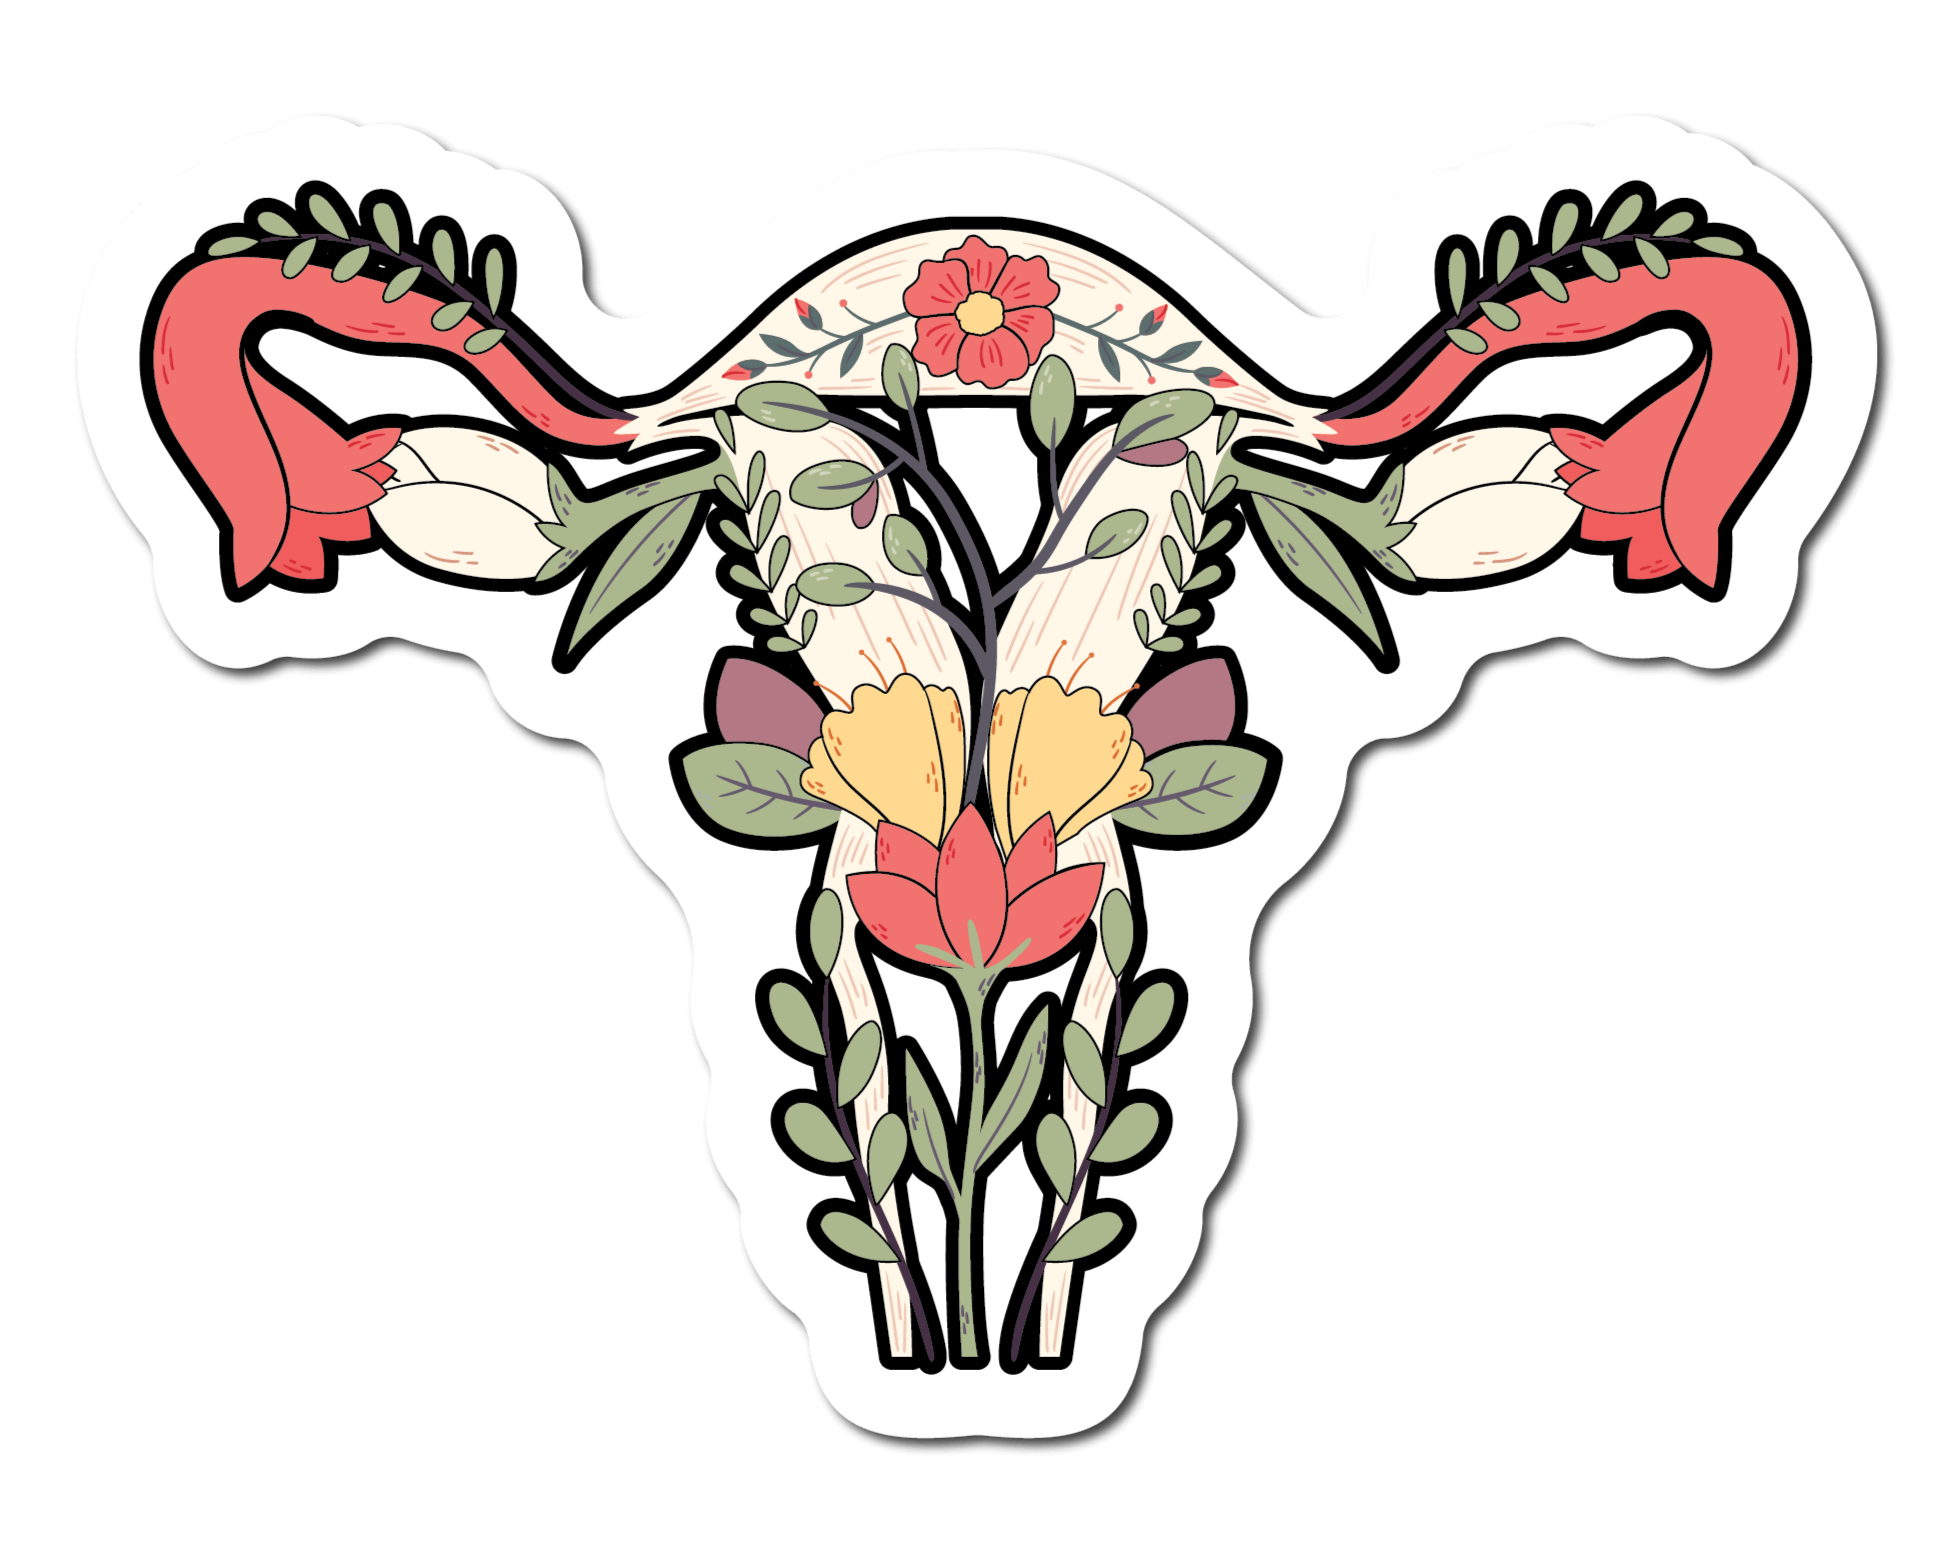 Small Sticker of a uterus with flowers on it